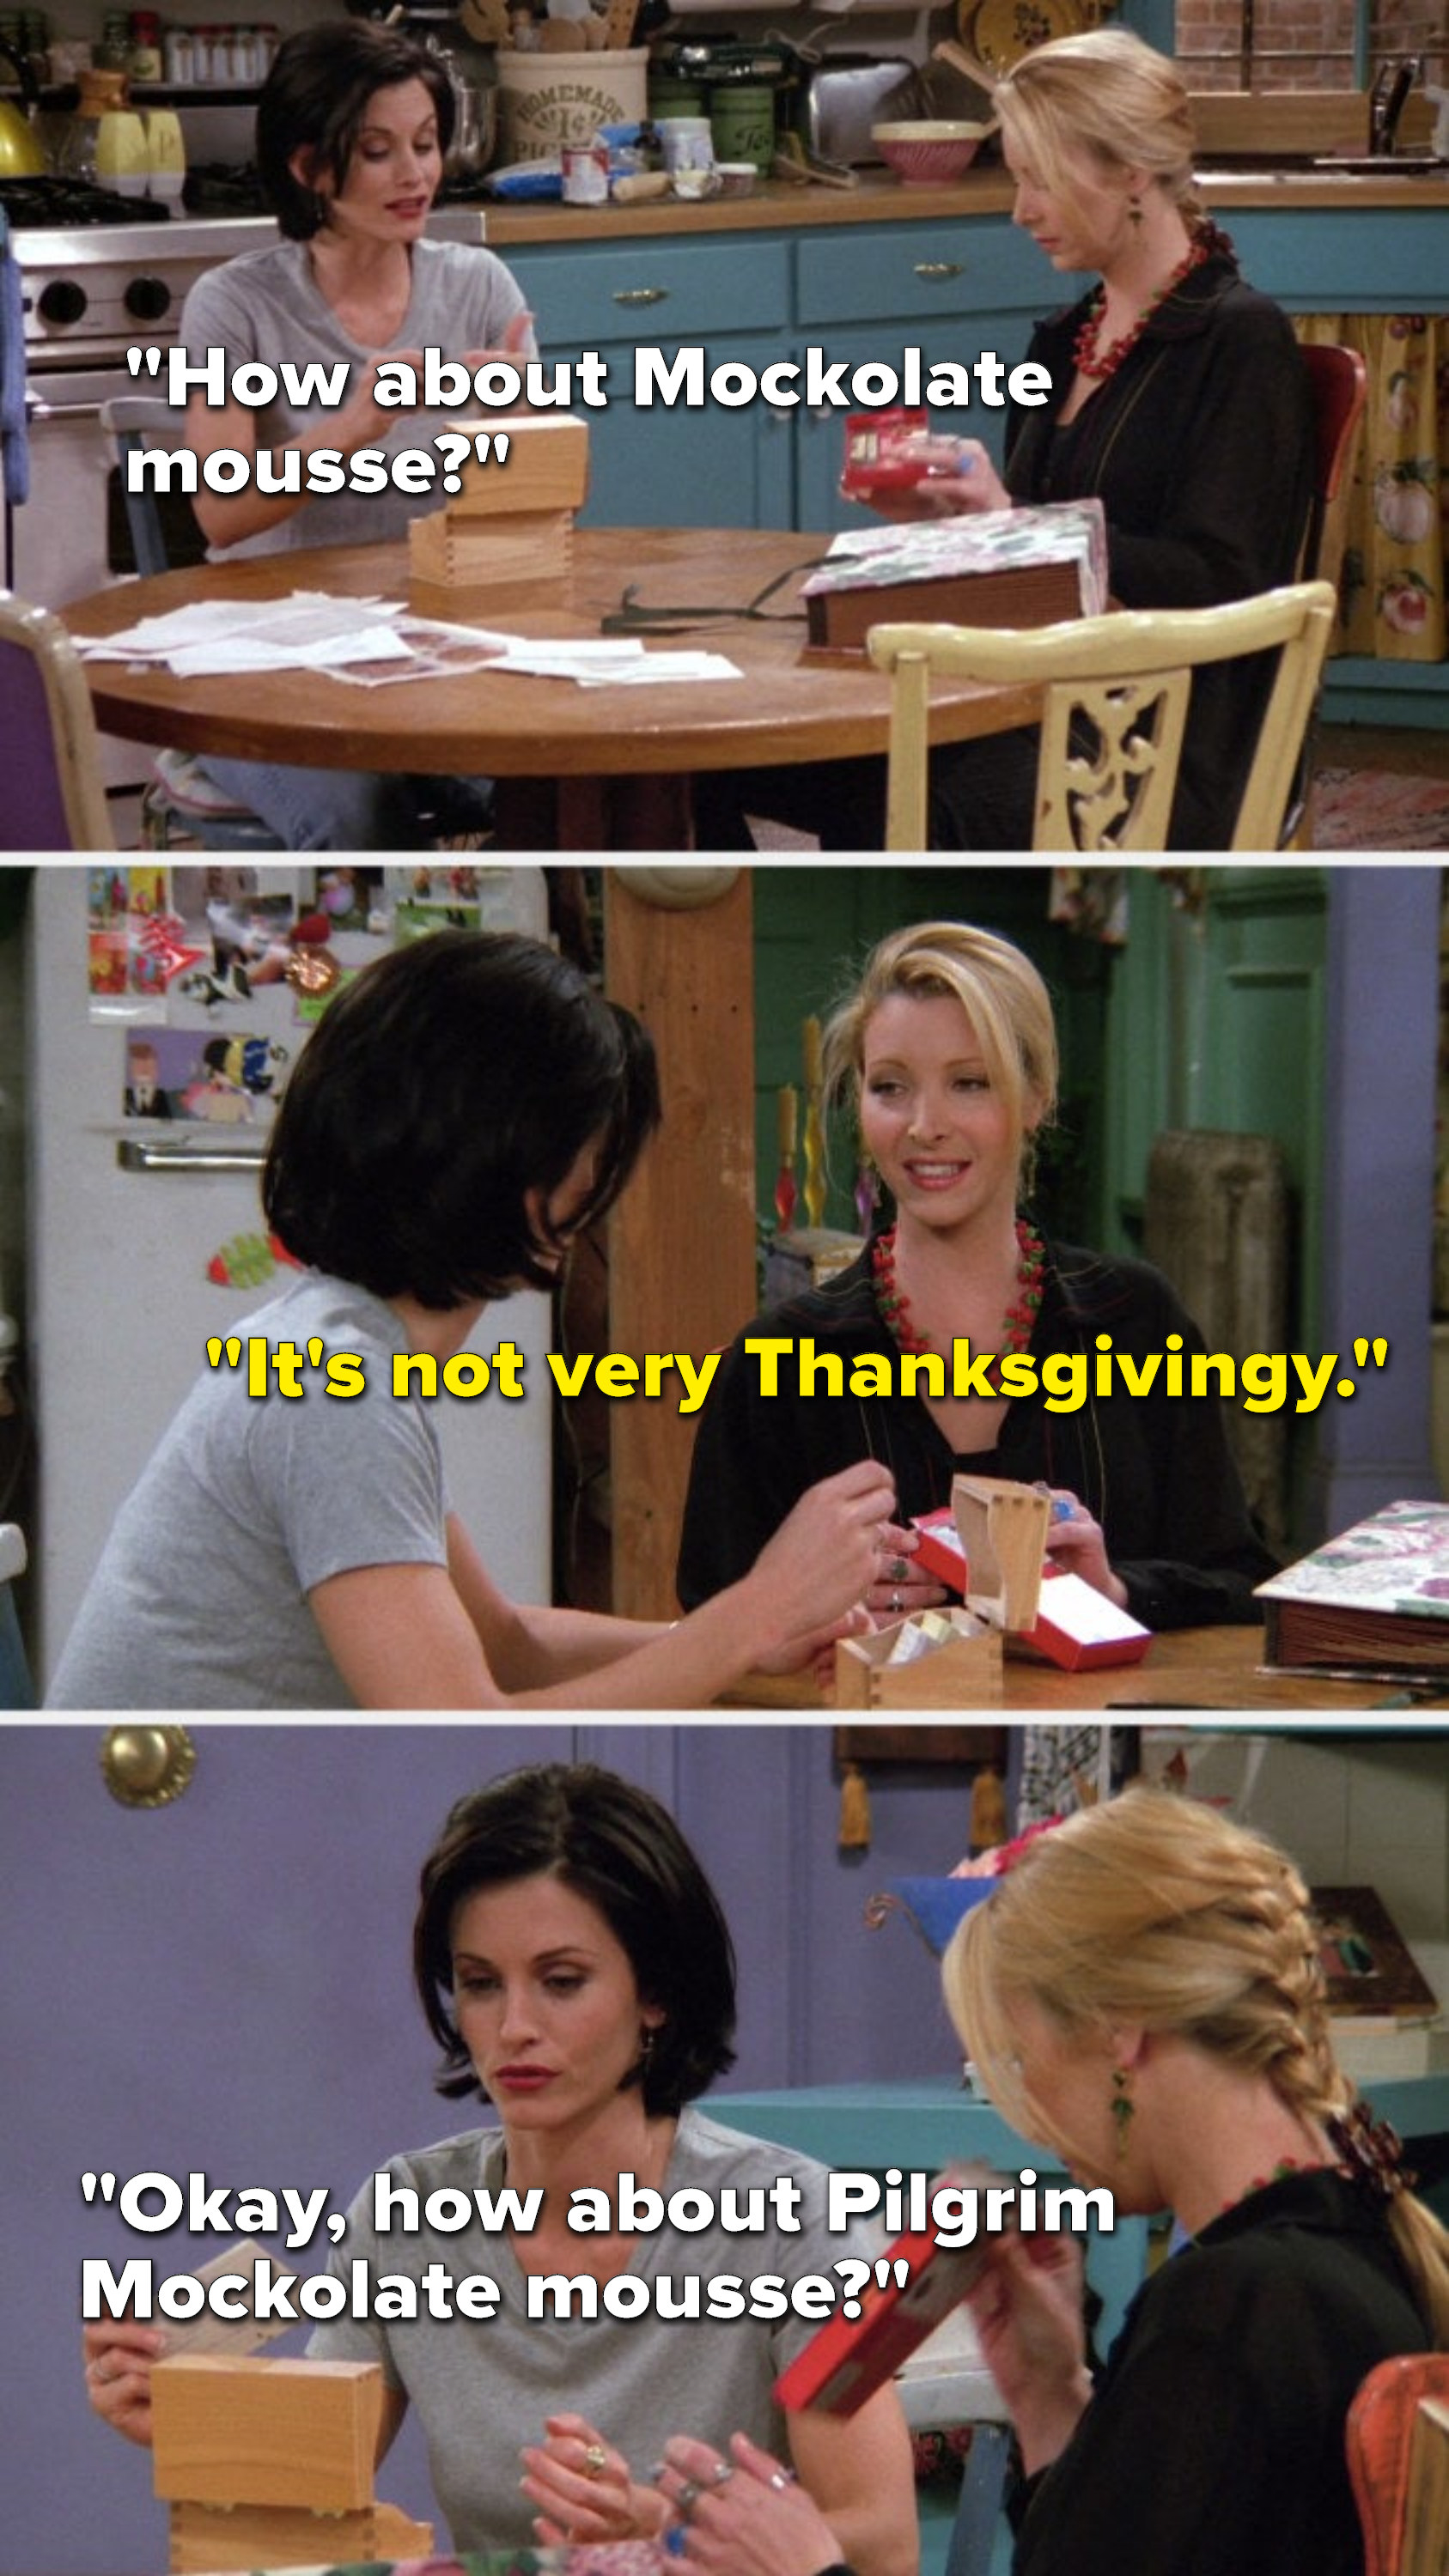 Monica says, &quot;How about Mockolate mousse,&quot; Phoebe says, &quot;It&#x27;s not very Thanksgivingy,&quot; and Monica says, &quot;Okay, how about Pilgrim Mockolate mousse&quot;